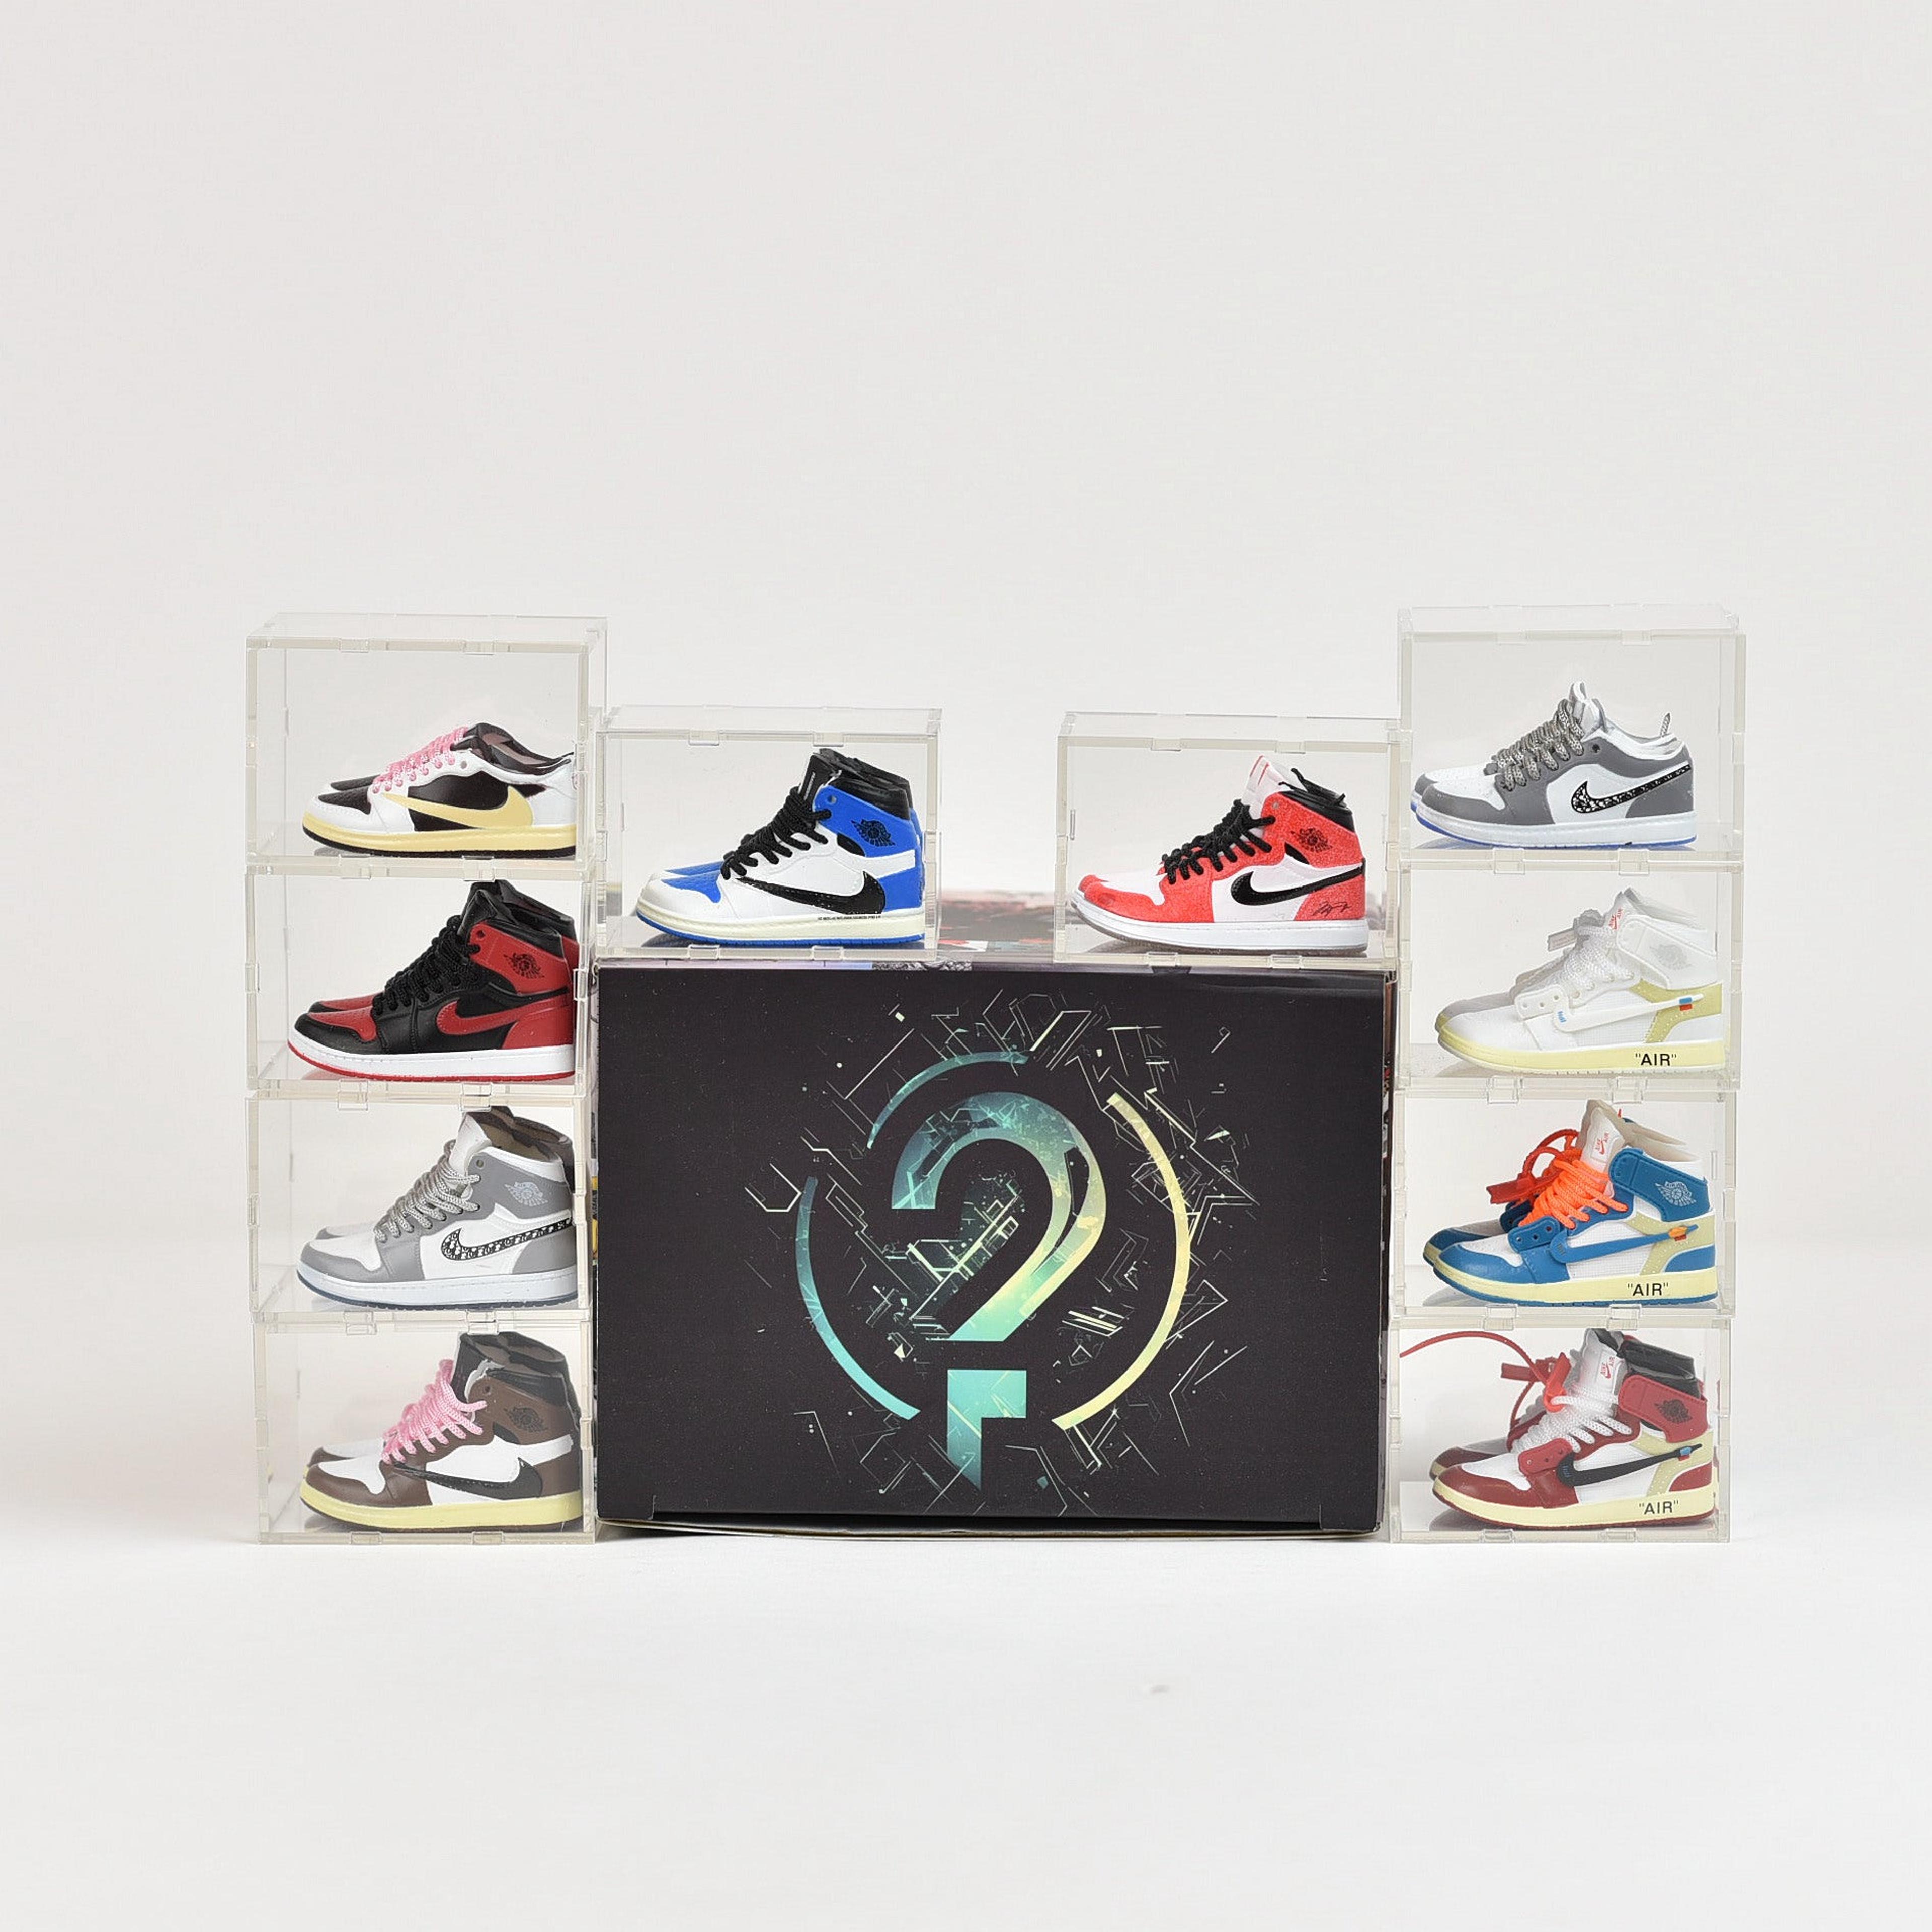 Alternate View 4 of AJ1 Mini Sneakers Collection with Display Case